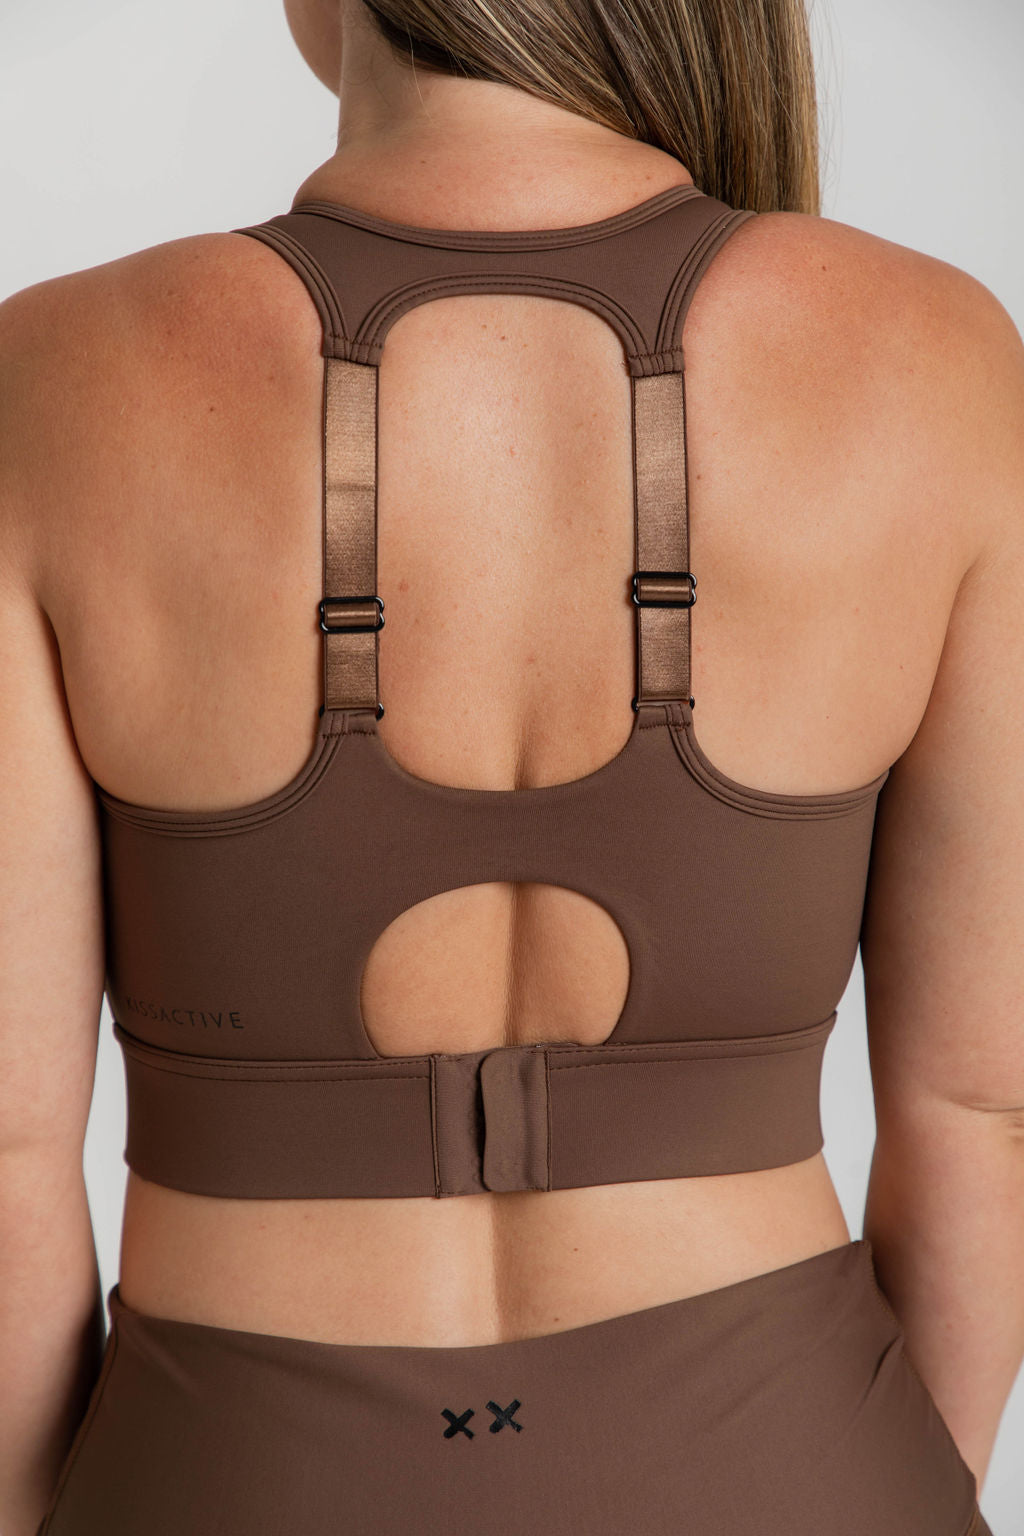 BEYOND SPORTS BRA - "THE ULTIMATE" MAXIMUM SUPPORT + MAX COVERAGE - COFFEE